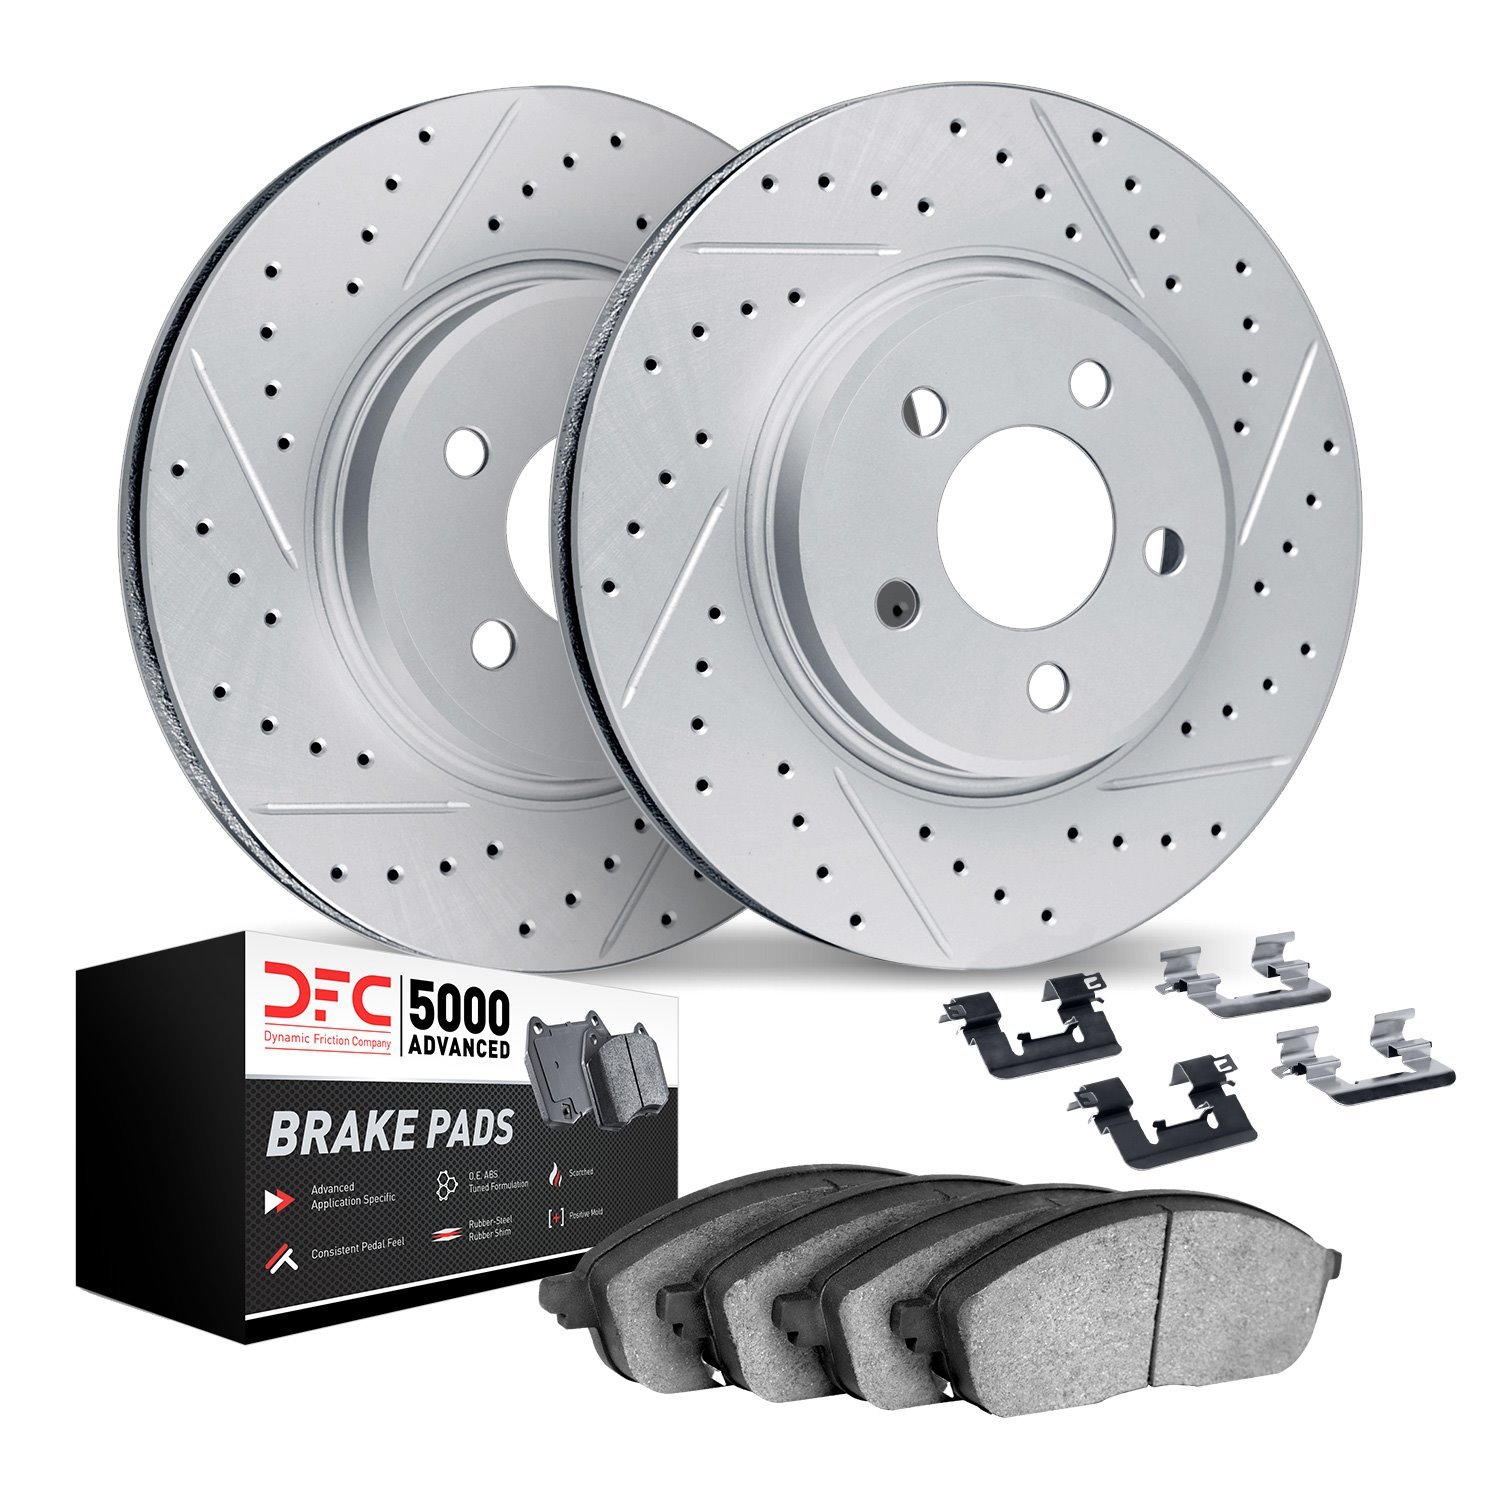 2512-80045 Geoperformance Drilled/Slotted Rotors w/5000 Advanced Brake Pads Kit & Hardware, Fits Select Ford/Lincoln/Mercury/Maz